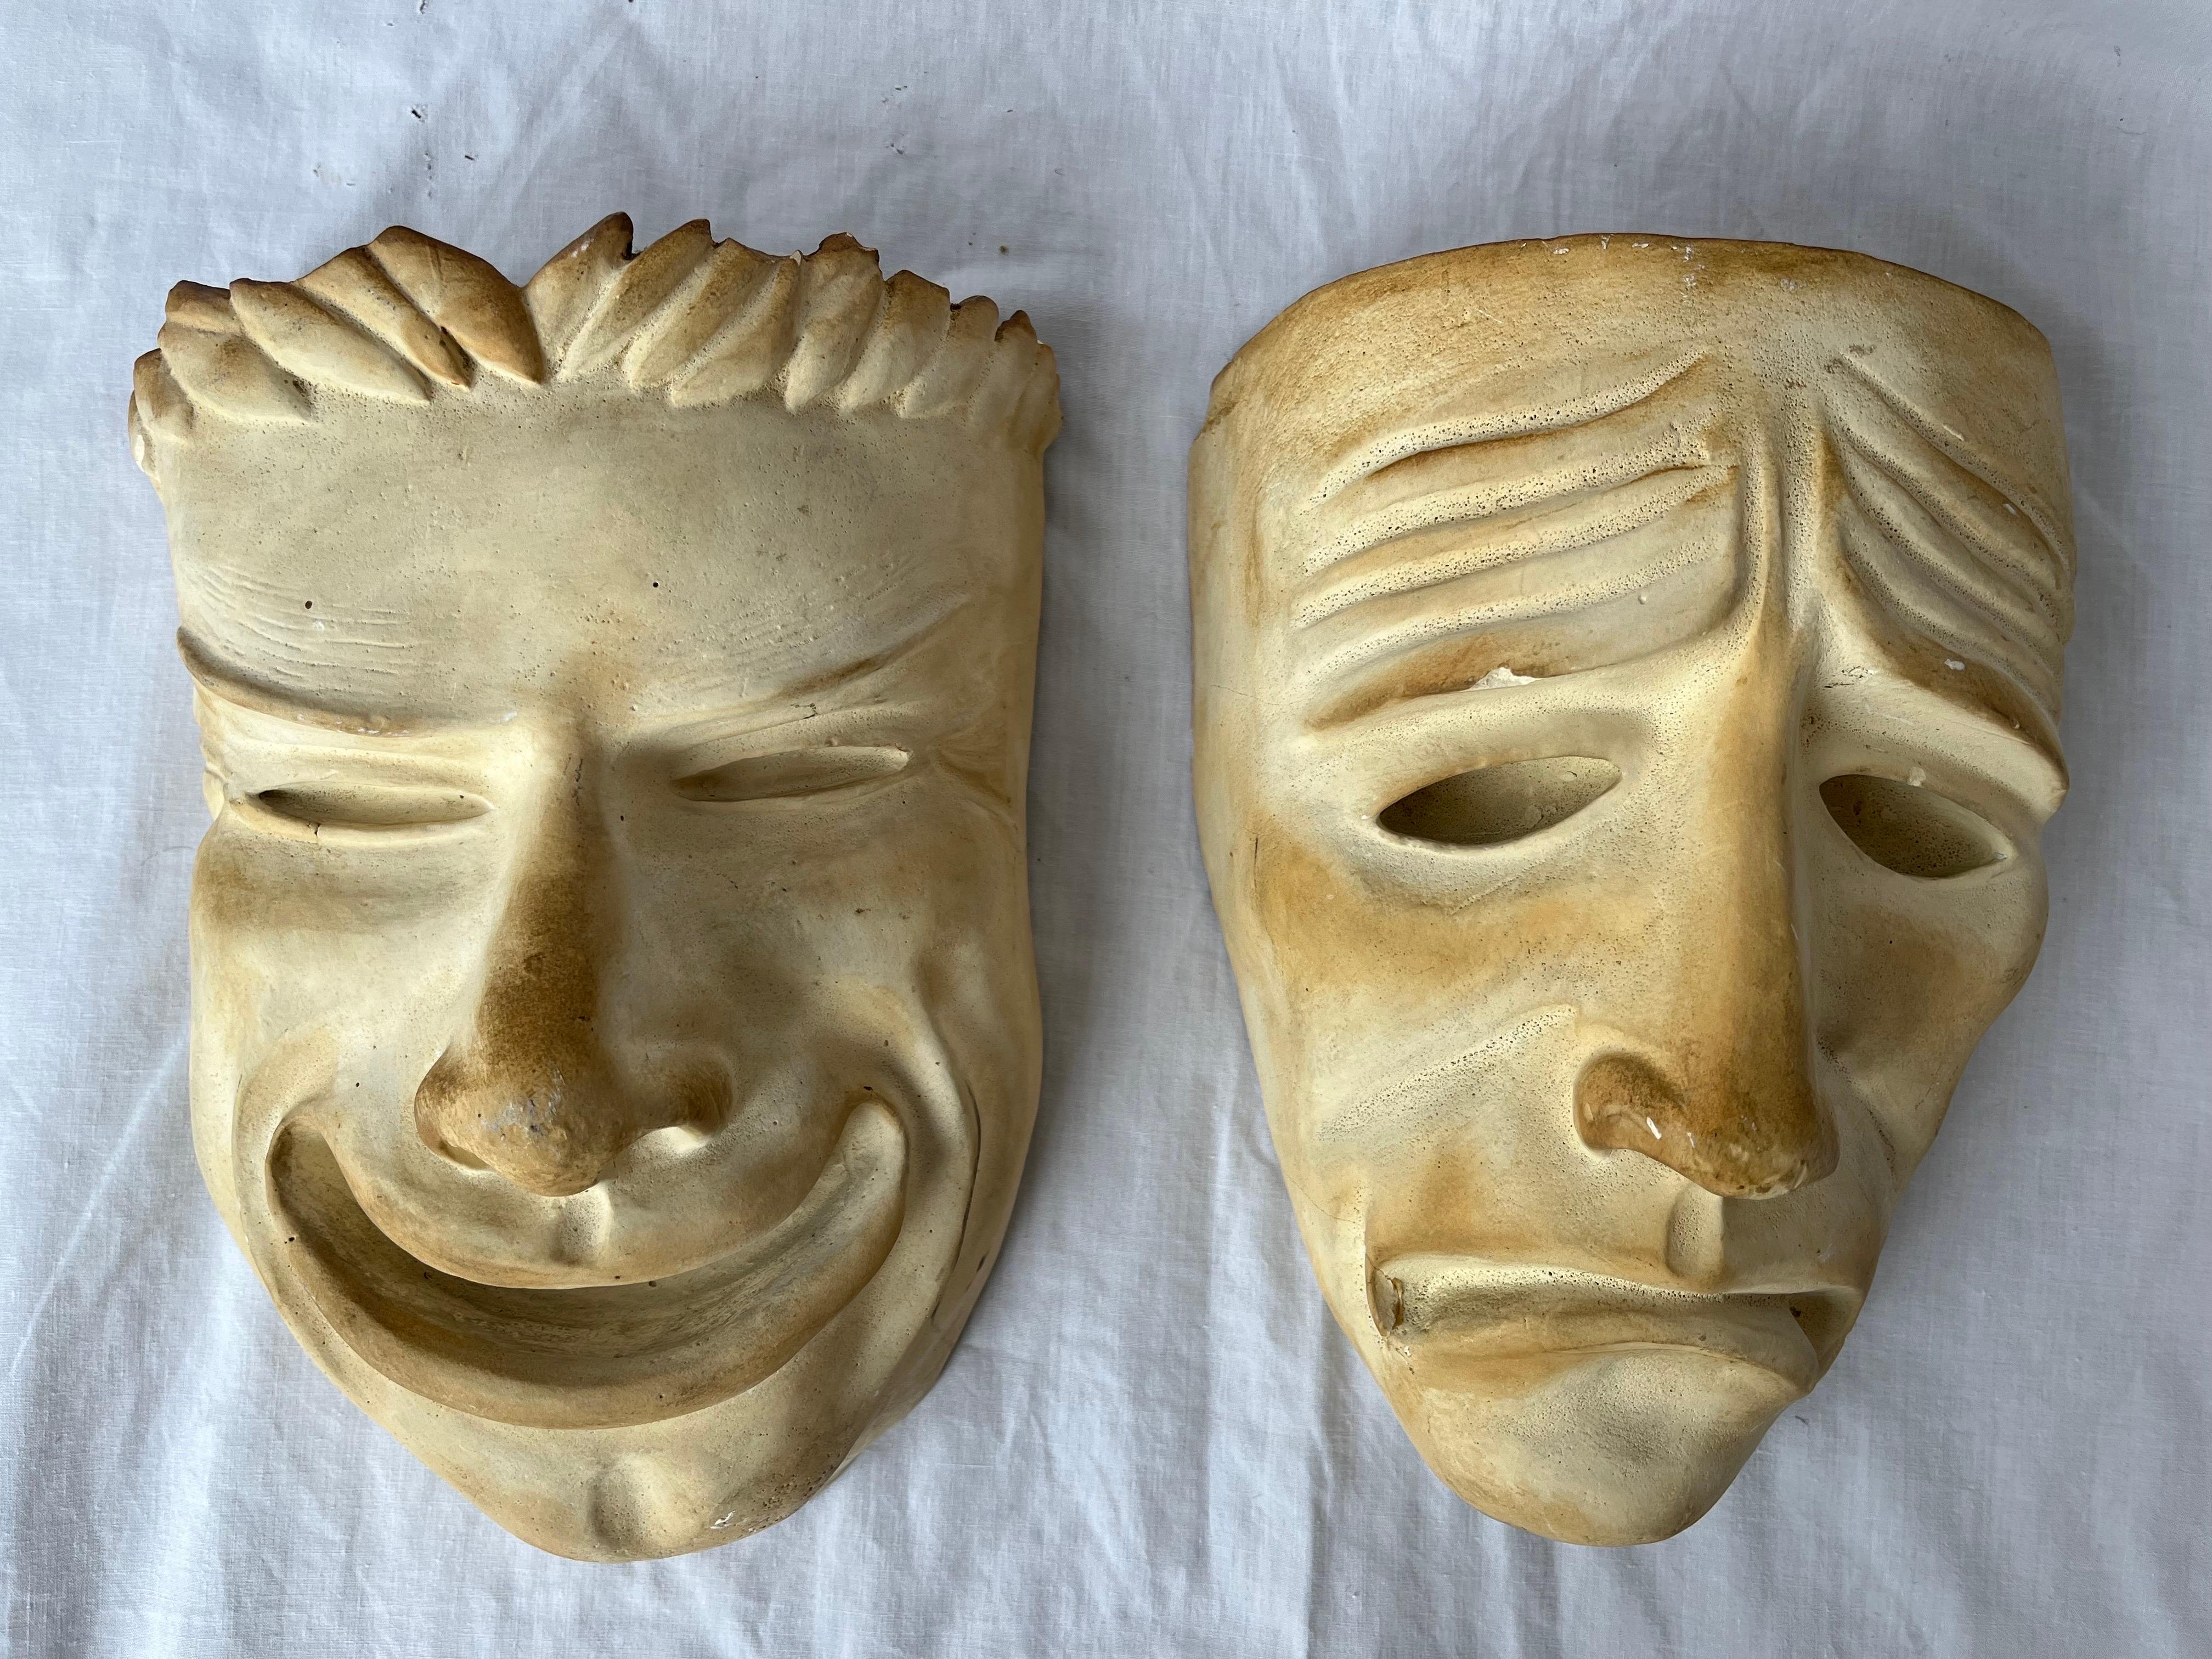 An almost antique pair of plaster comedy and tragedy theater masks. With incredible details, ultra-expressive countenances and wonderful scale, this duo evokes all the emotions. The plaster forms each have beautiful patina. There are integrated